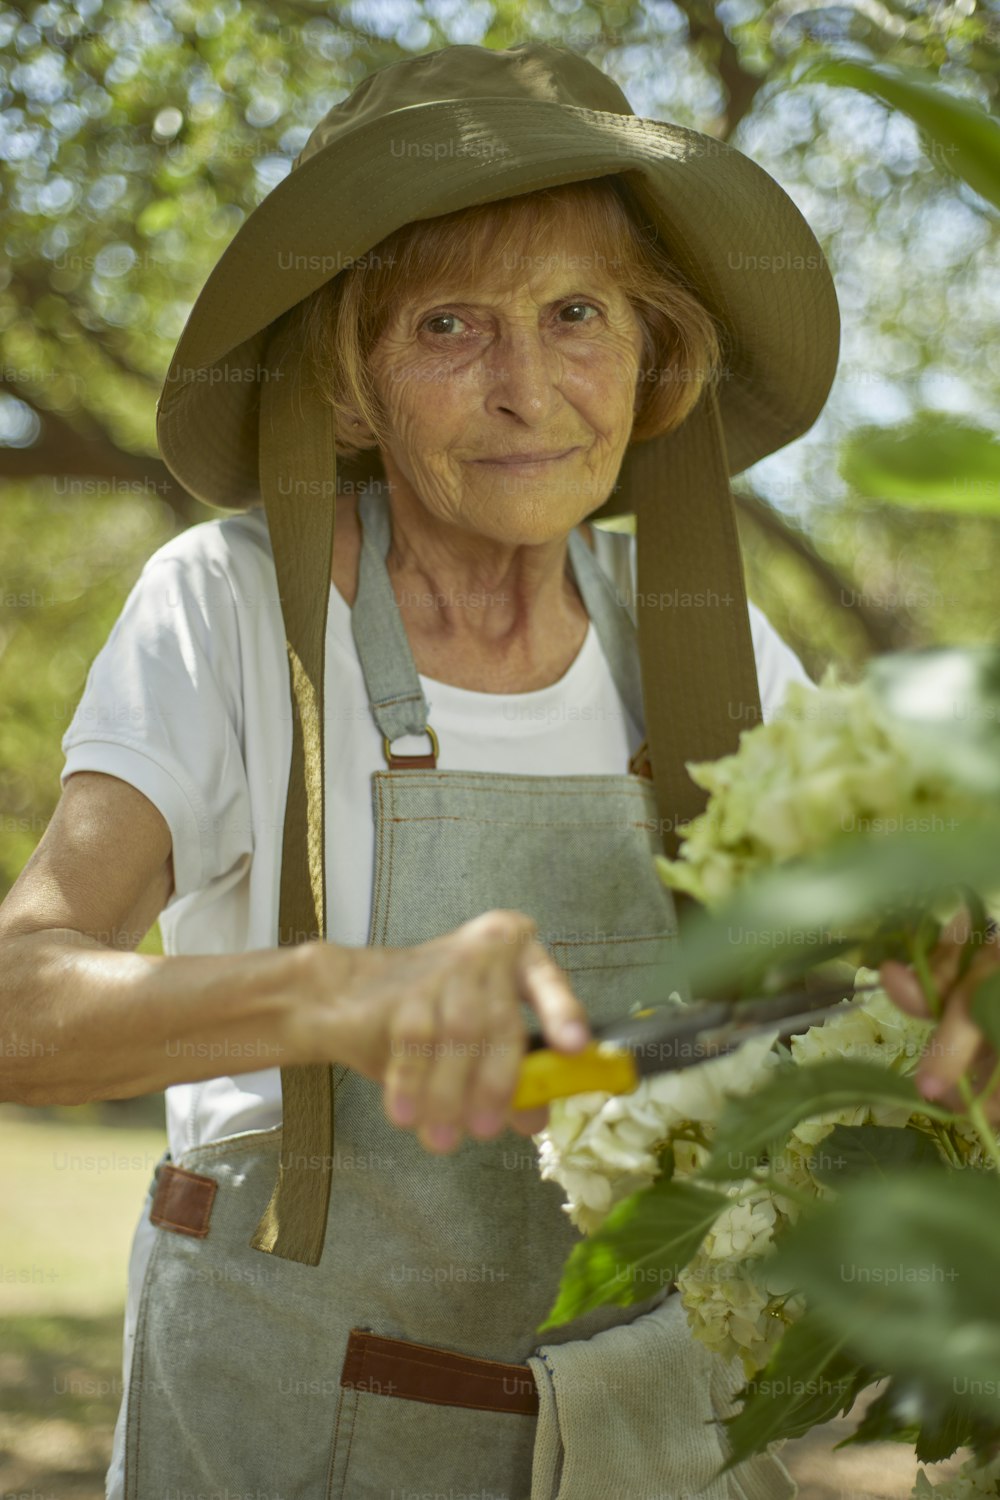 a woman in a hat cutting flowers with a pair of scissors